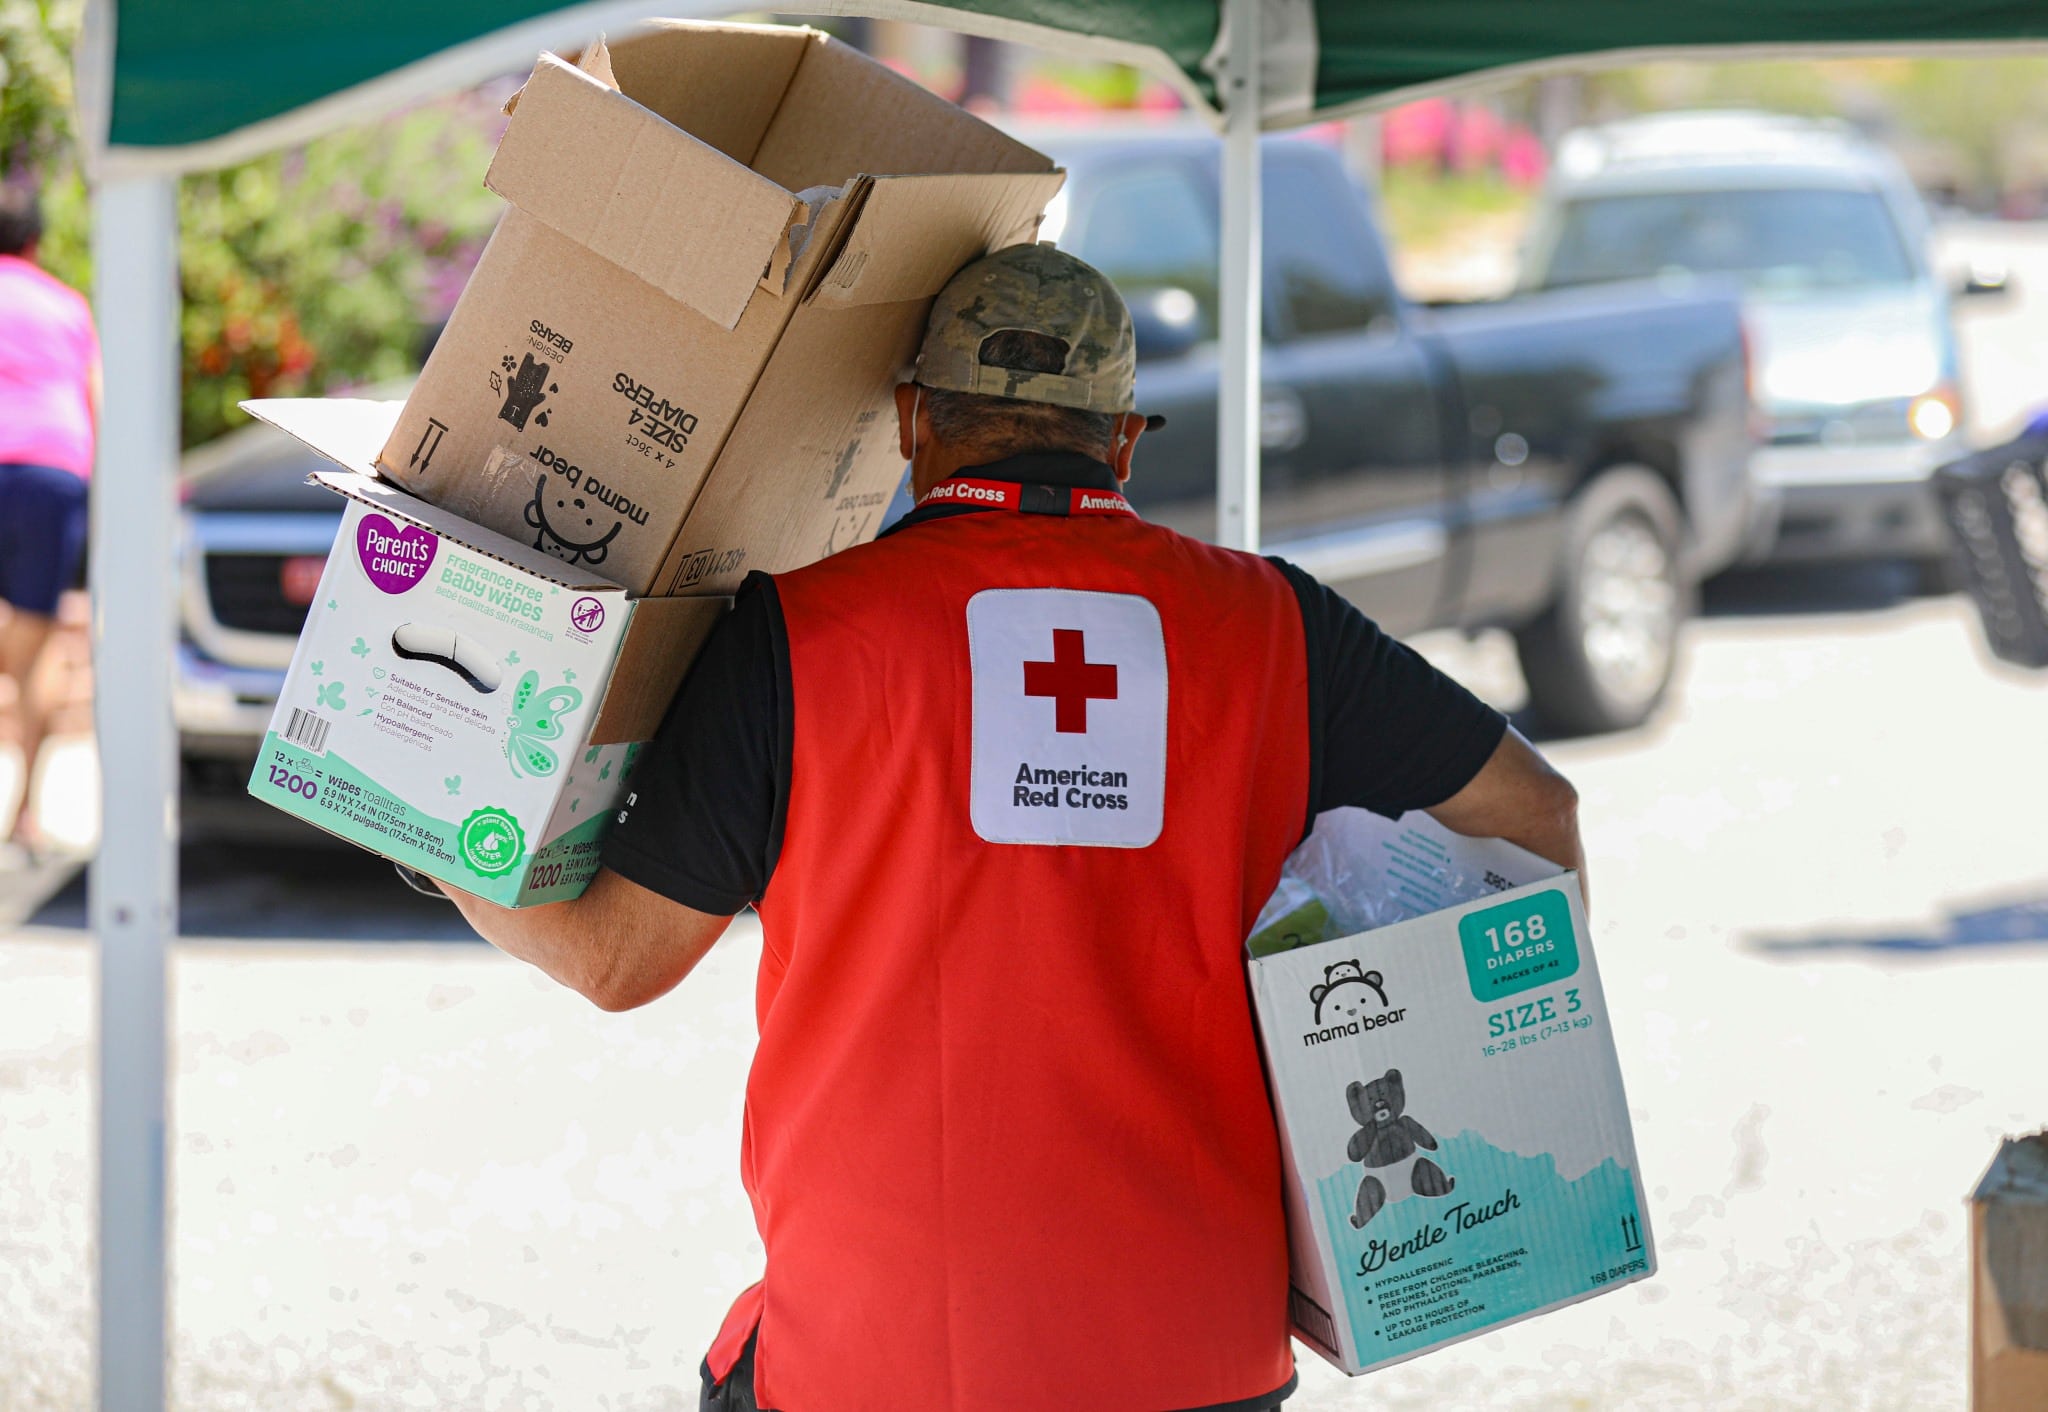 95684919 10157988827400071 6842400540576448512 o Discover volunteer opportunities with the Red Cross in Birmingham